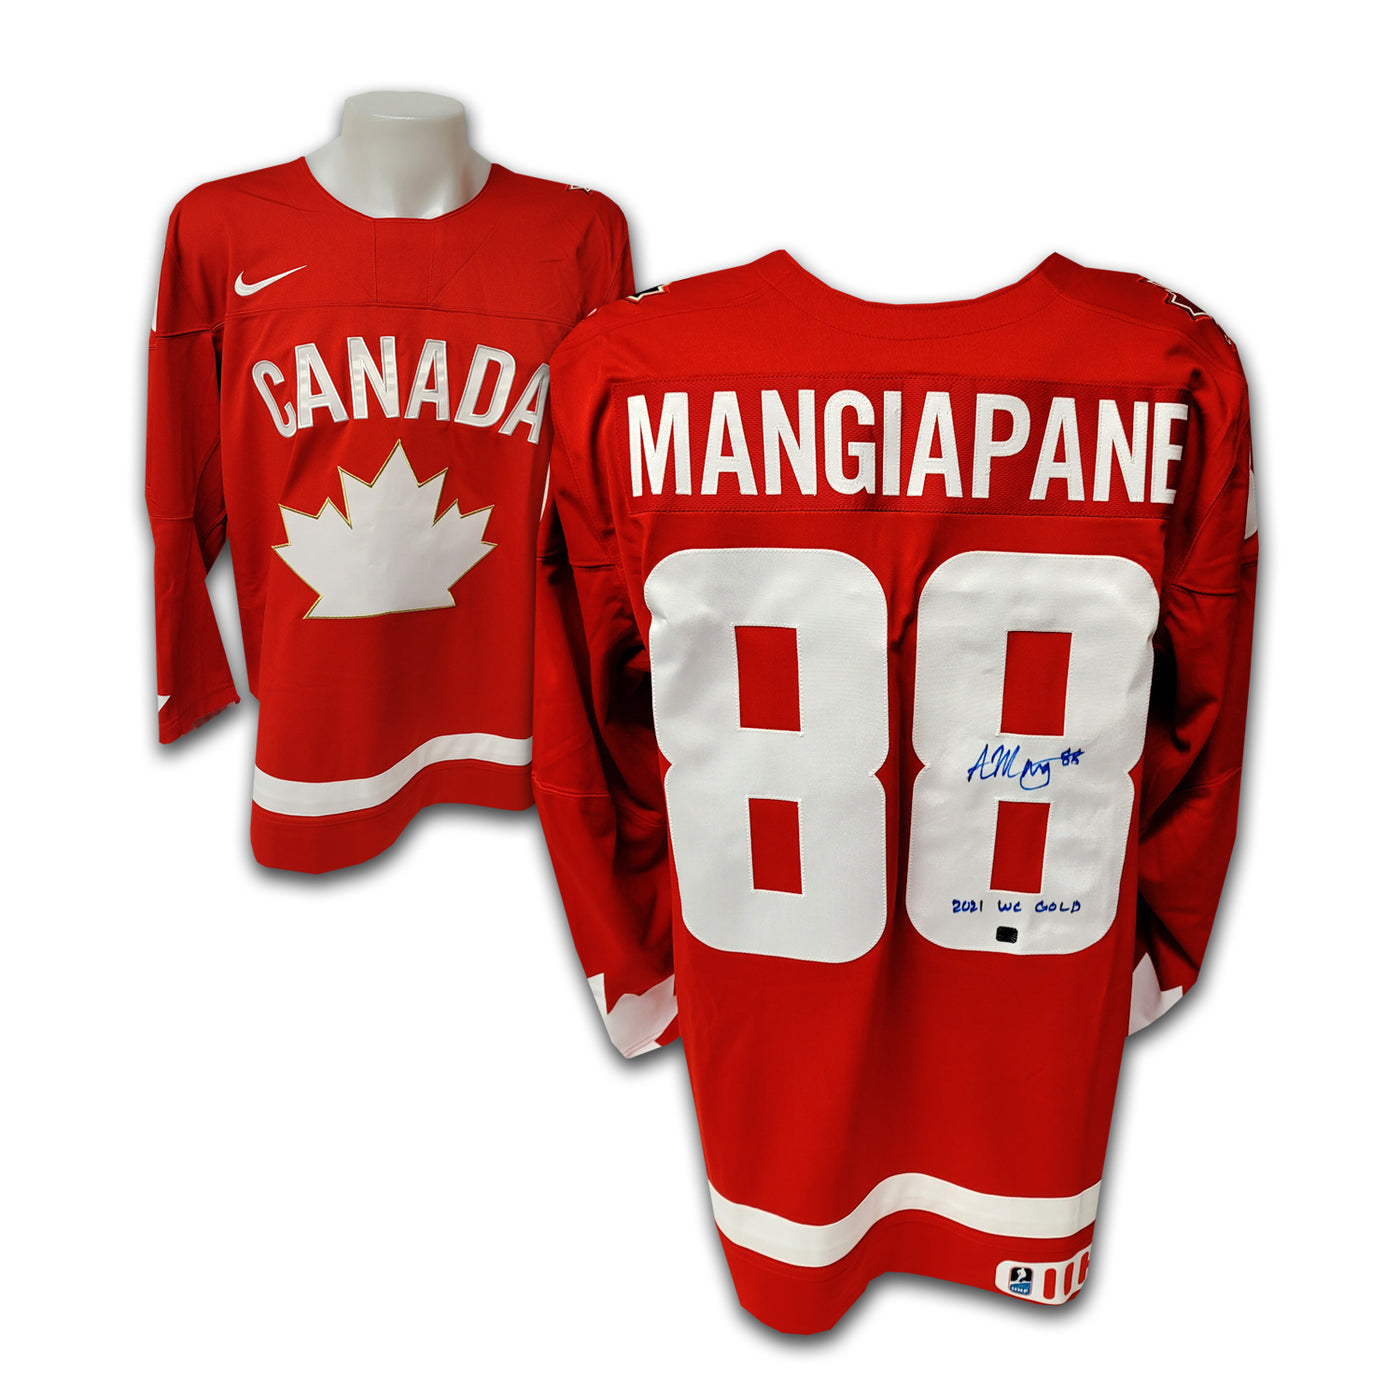 Andrew Mangiapane Team Canada 2021 Red Alternate Nike Jersey Inscribed 2021 WC Gold